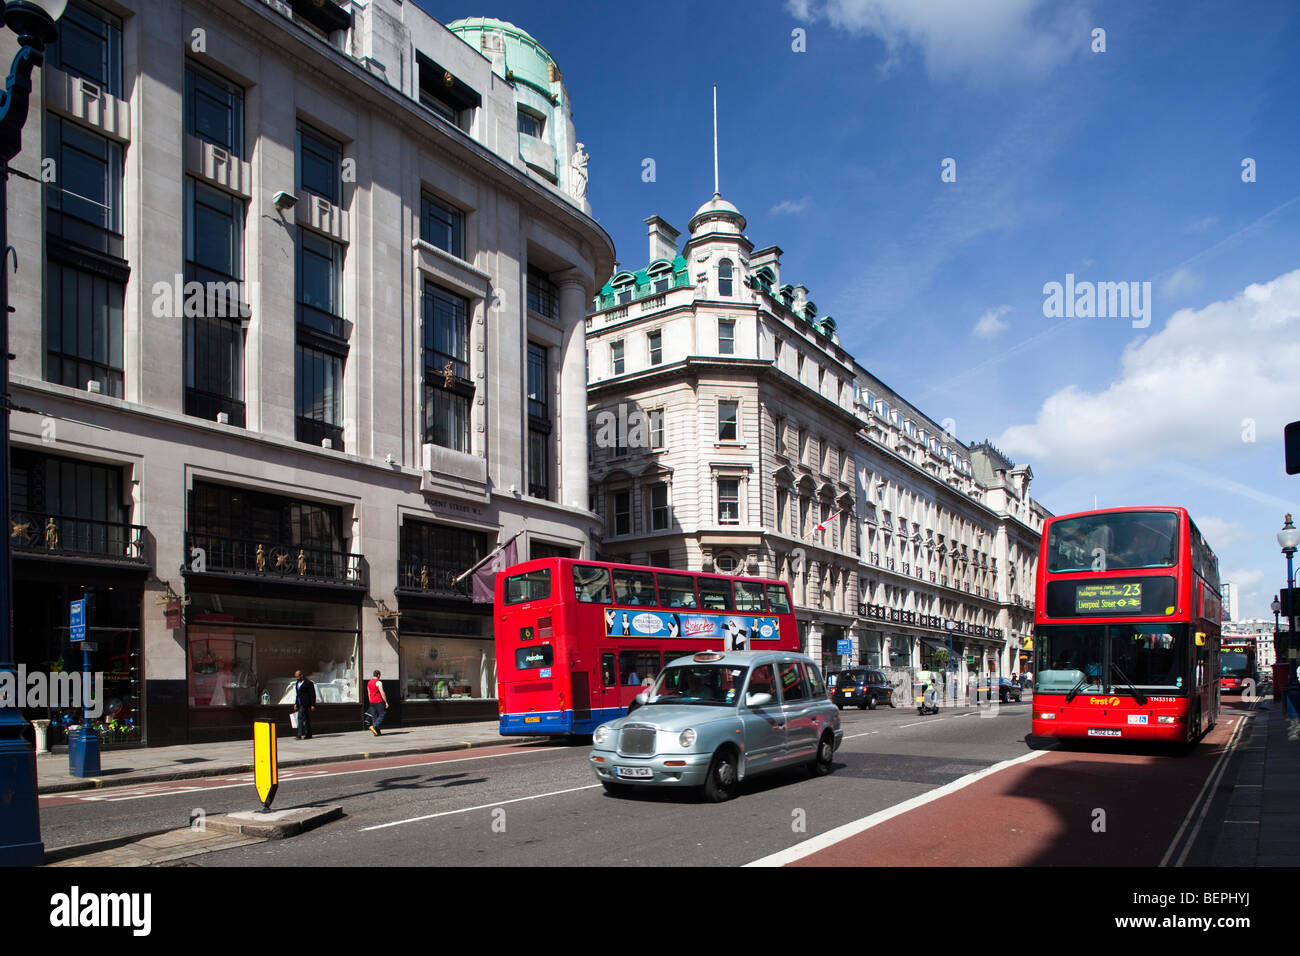 Typical double decker red buses, Regent Street, Westminster, London, England, United Kingdom Stock Photo